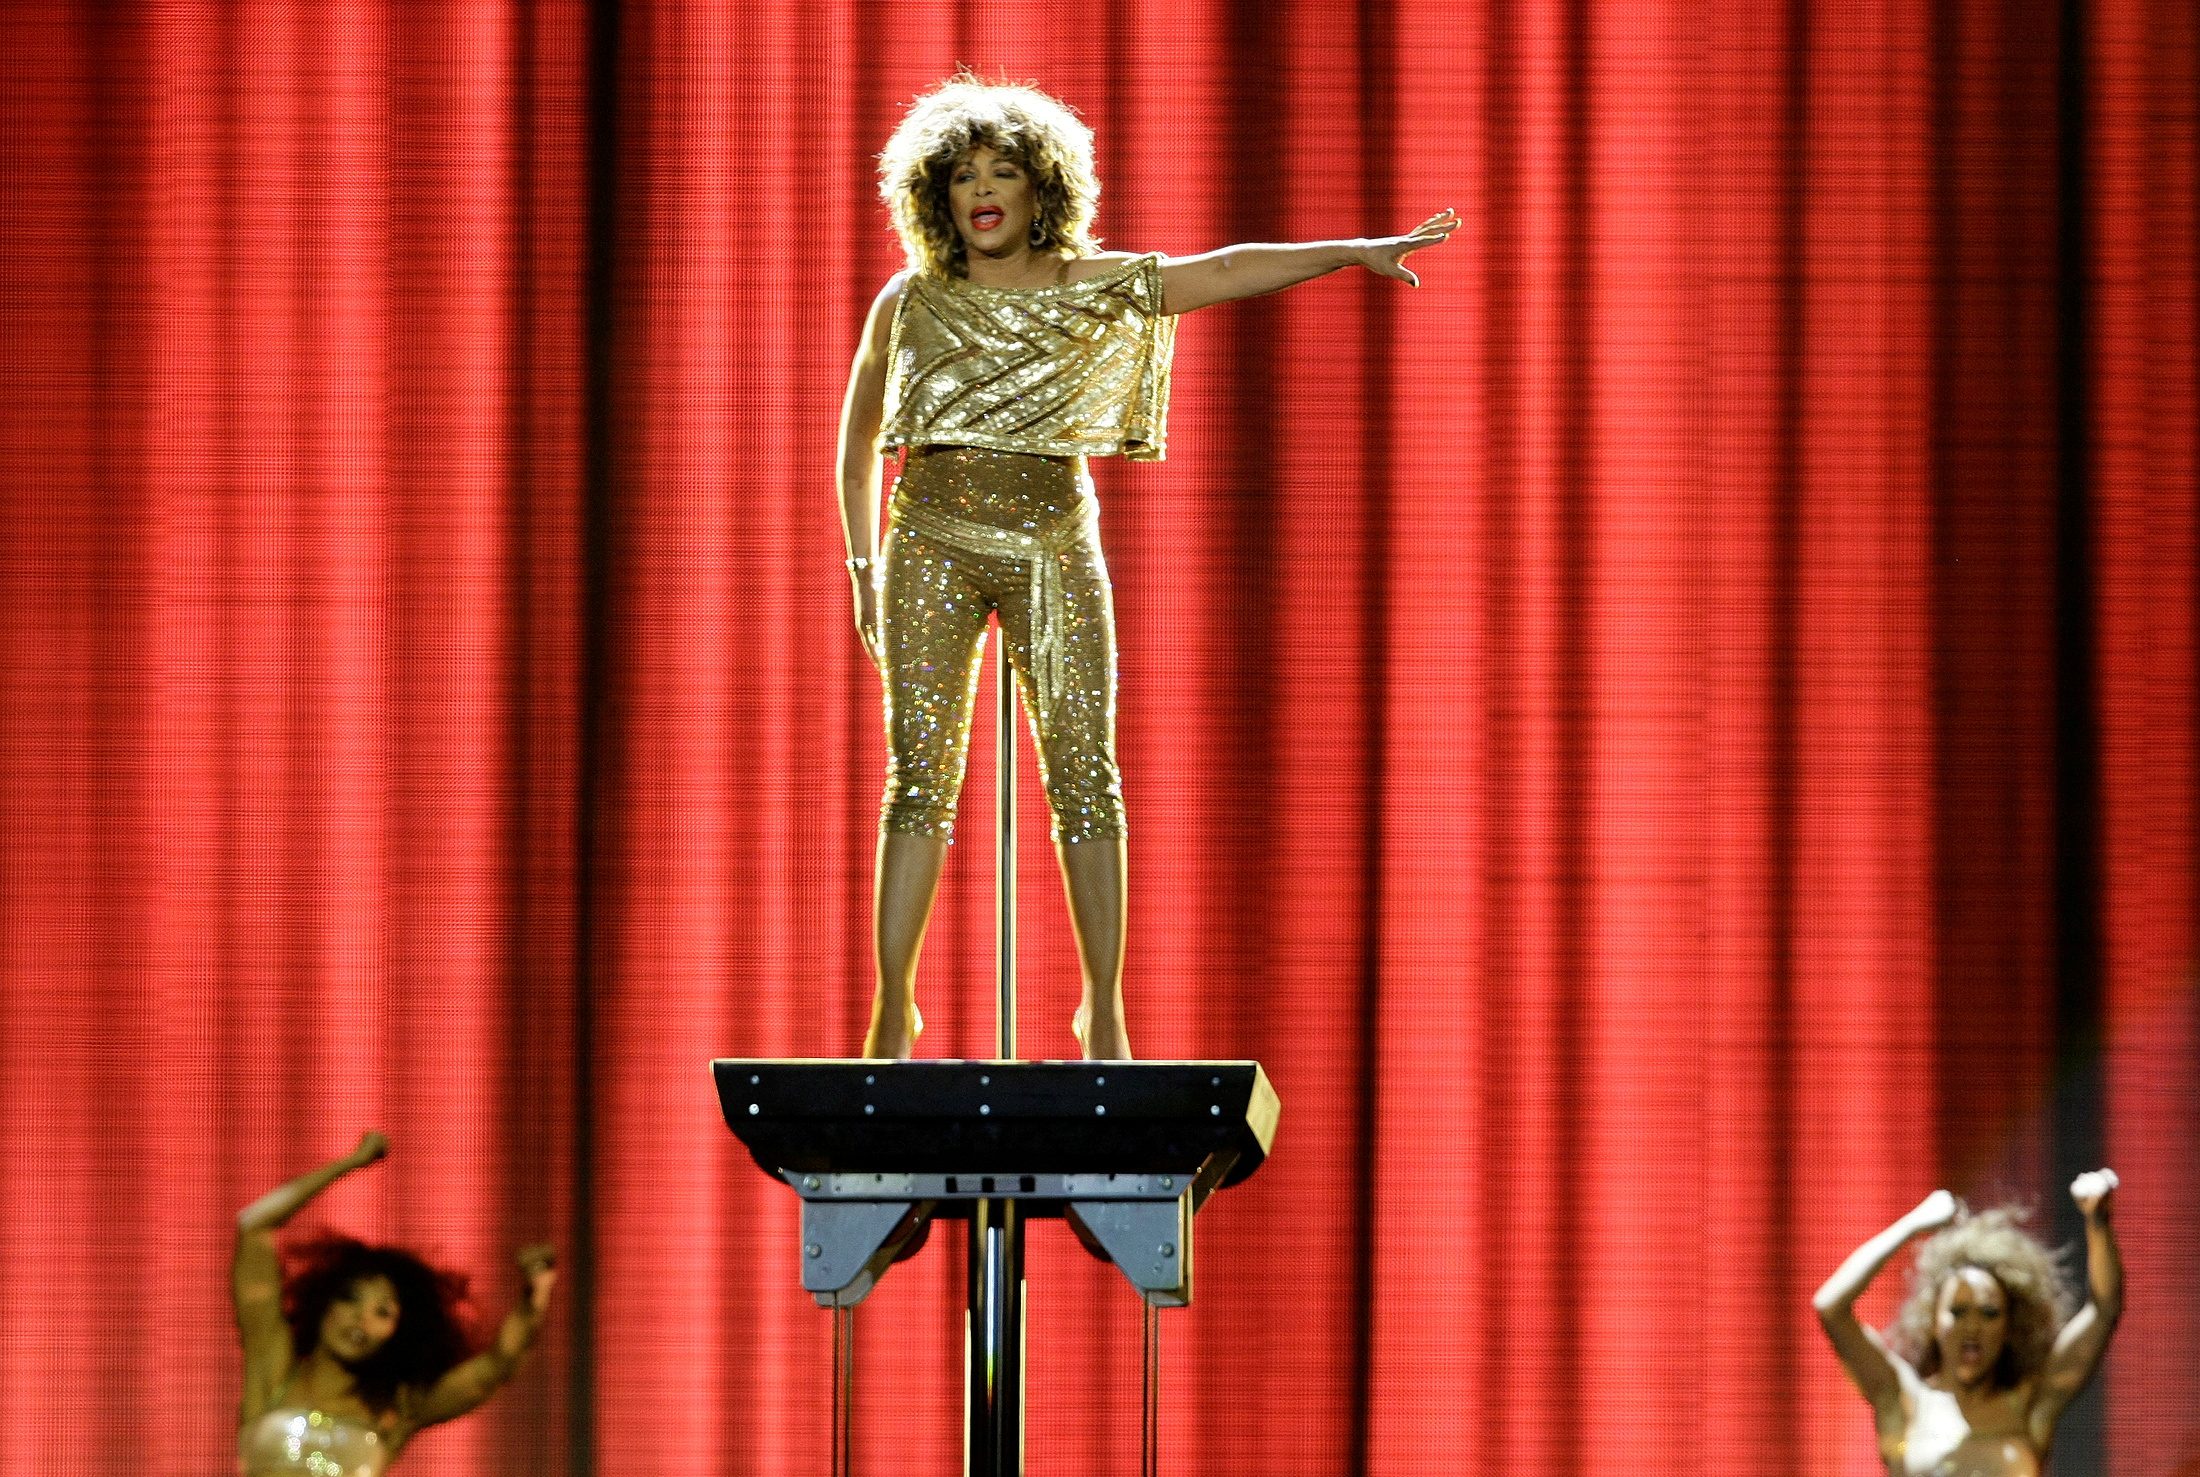 Tina Turner, Jay-Z, Go-Go’s selected for Rock & Roll Hall of Fame